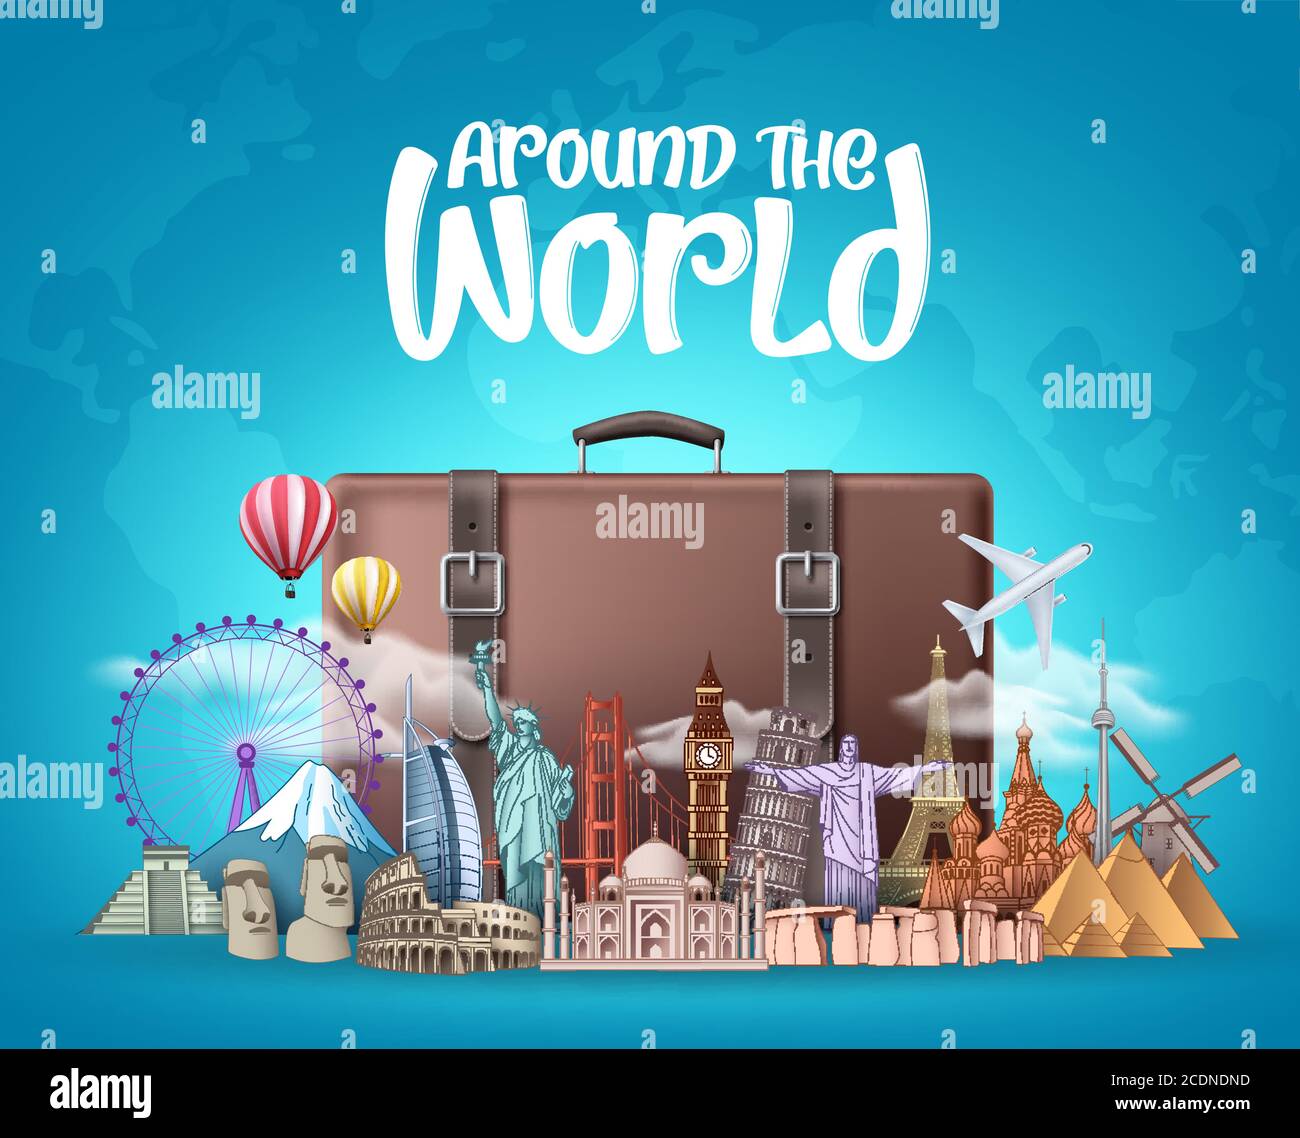 Travel around the world vector design. Travelling suitcase bag and famous landmarks around the world elements with around the world text in blue Stock Vector